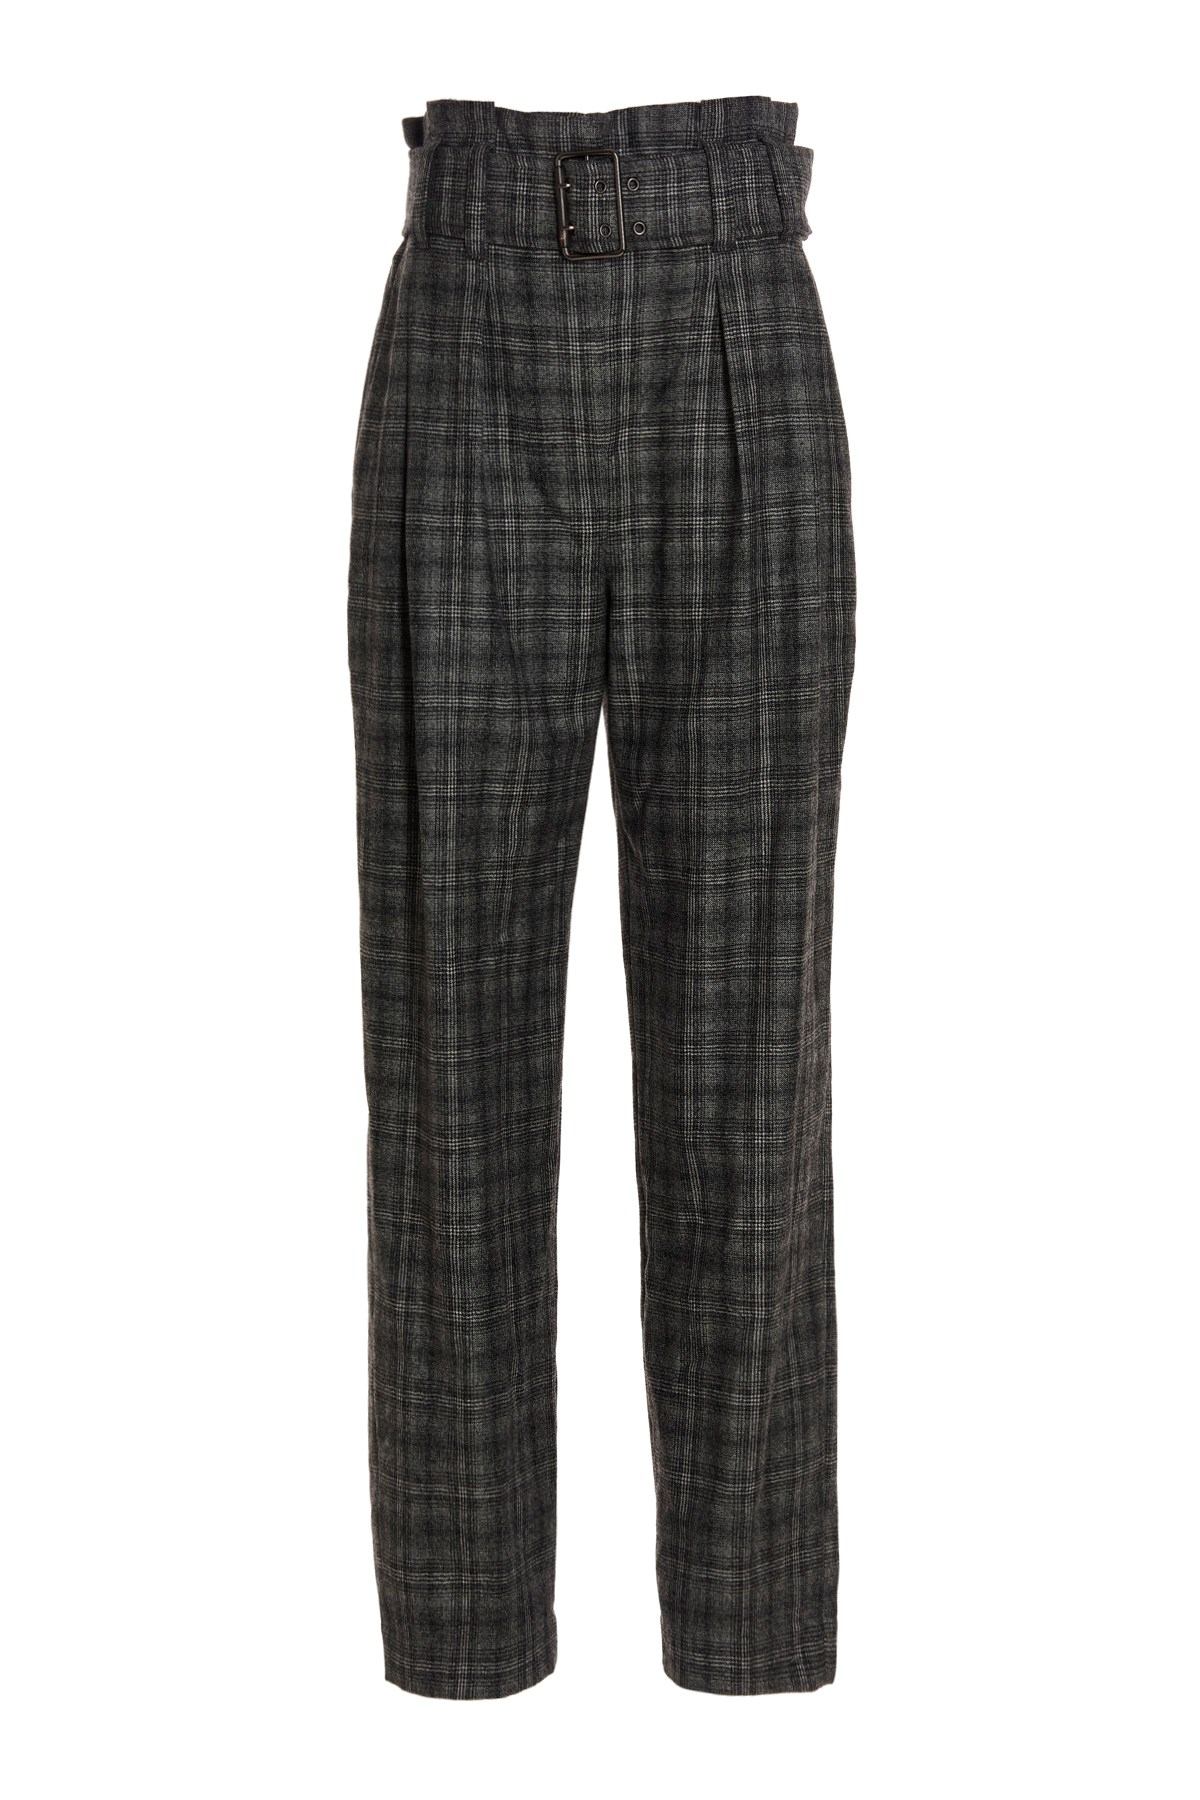 BRUNELLO CUCINELLI Check Wool Trousers